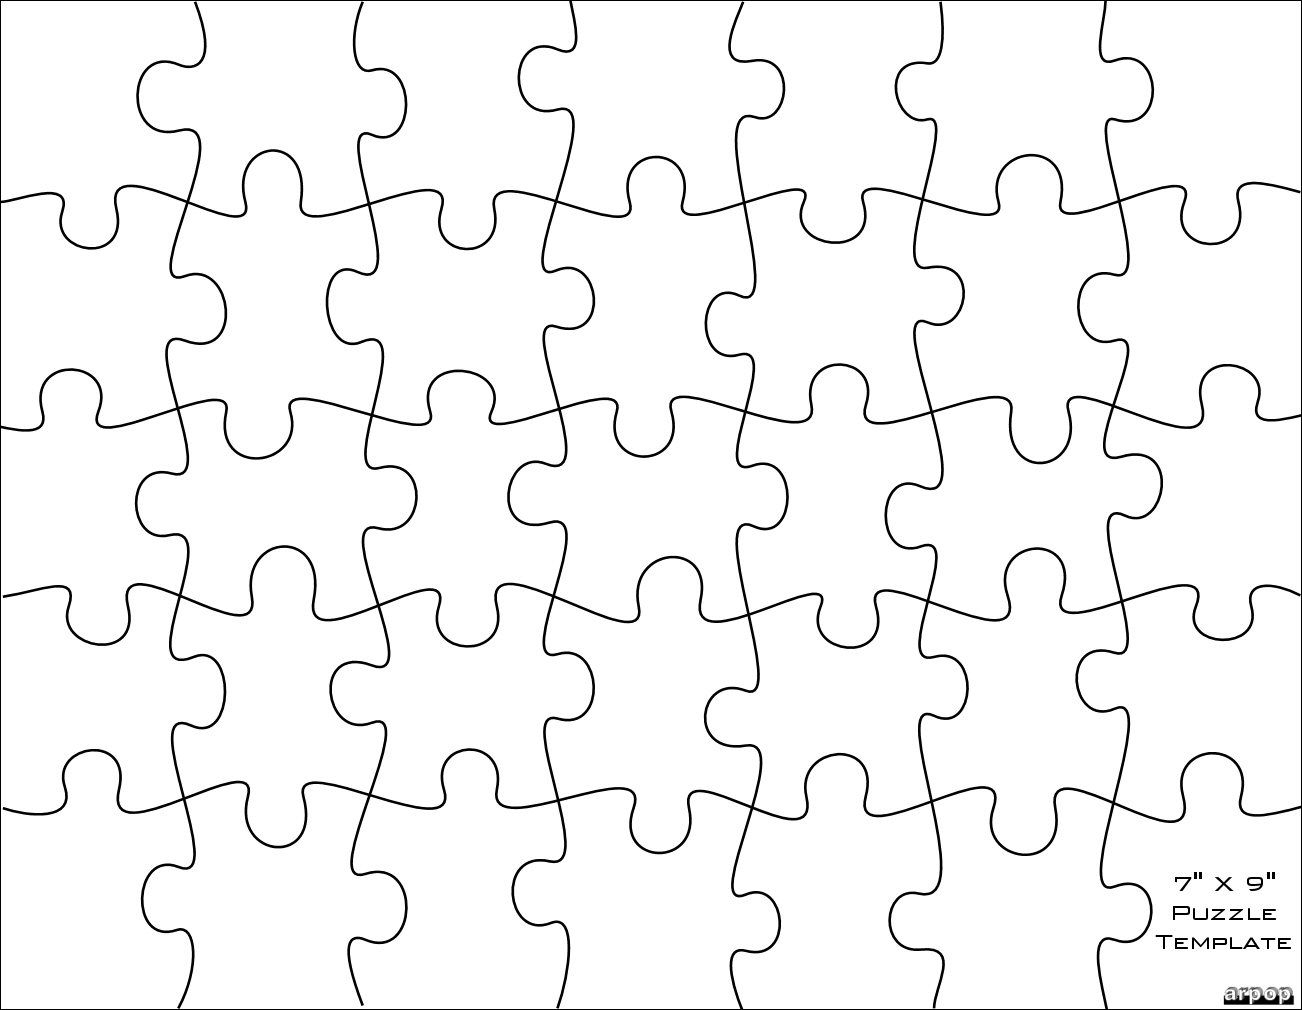 Free Scroll Saw Patternsarpop: Jigsaw Puzzle Templates | School - Create A Printable Jigsaw Puzzle